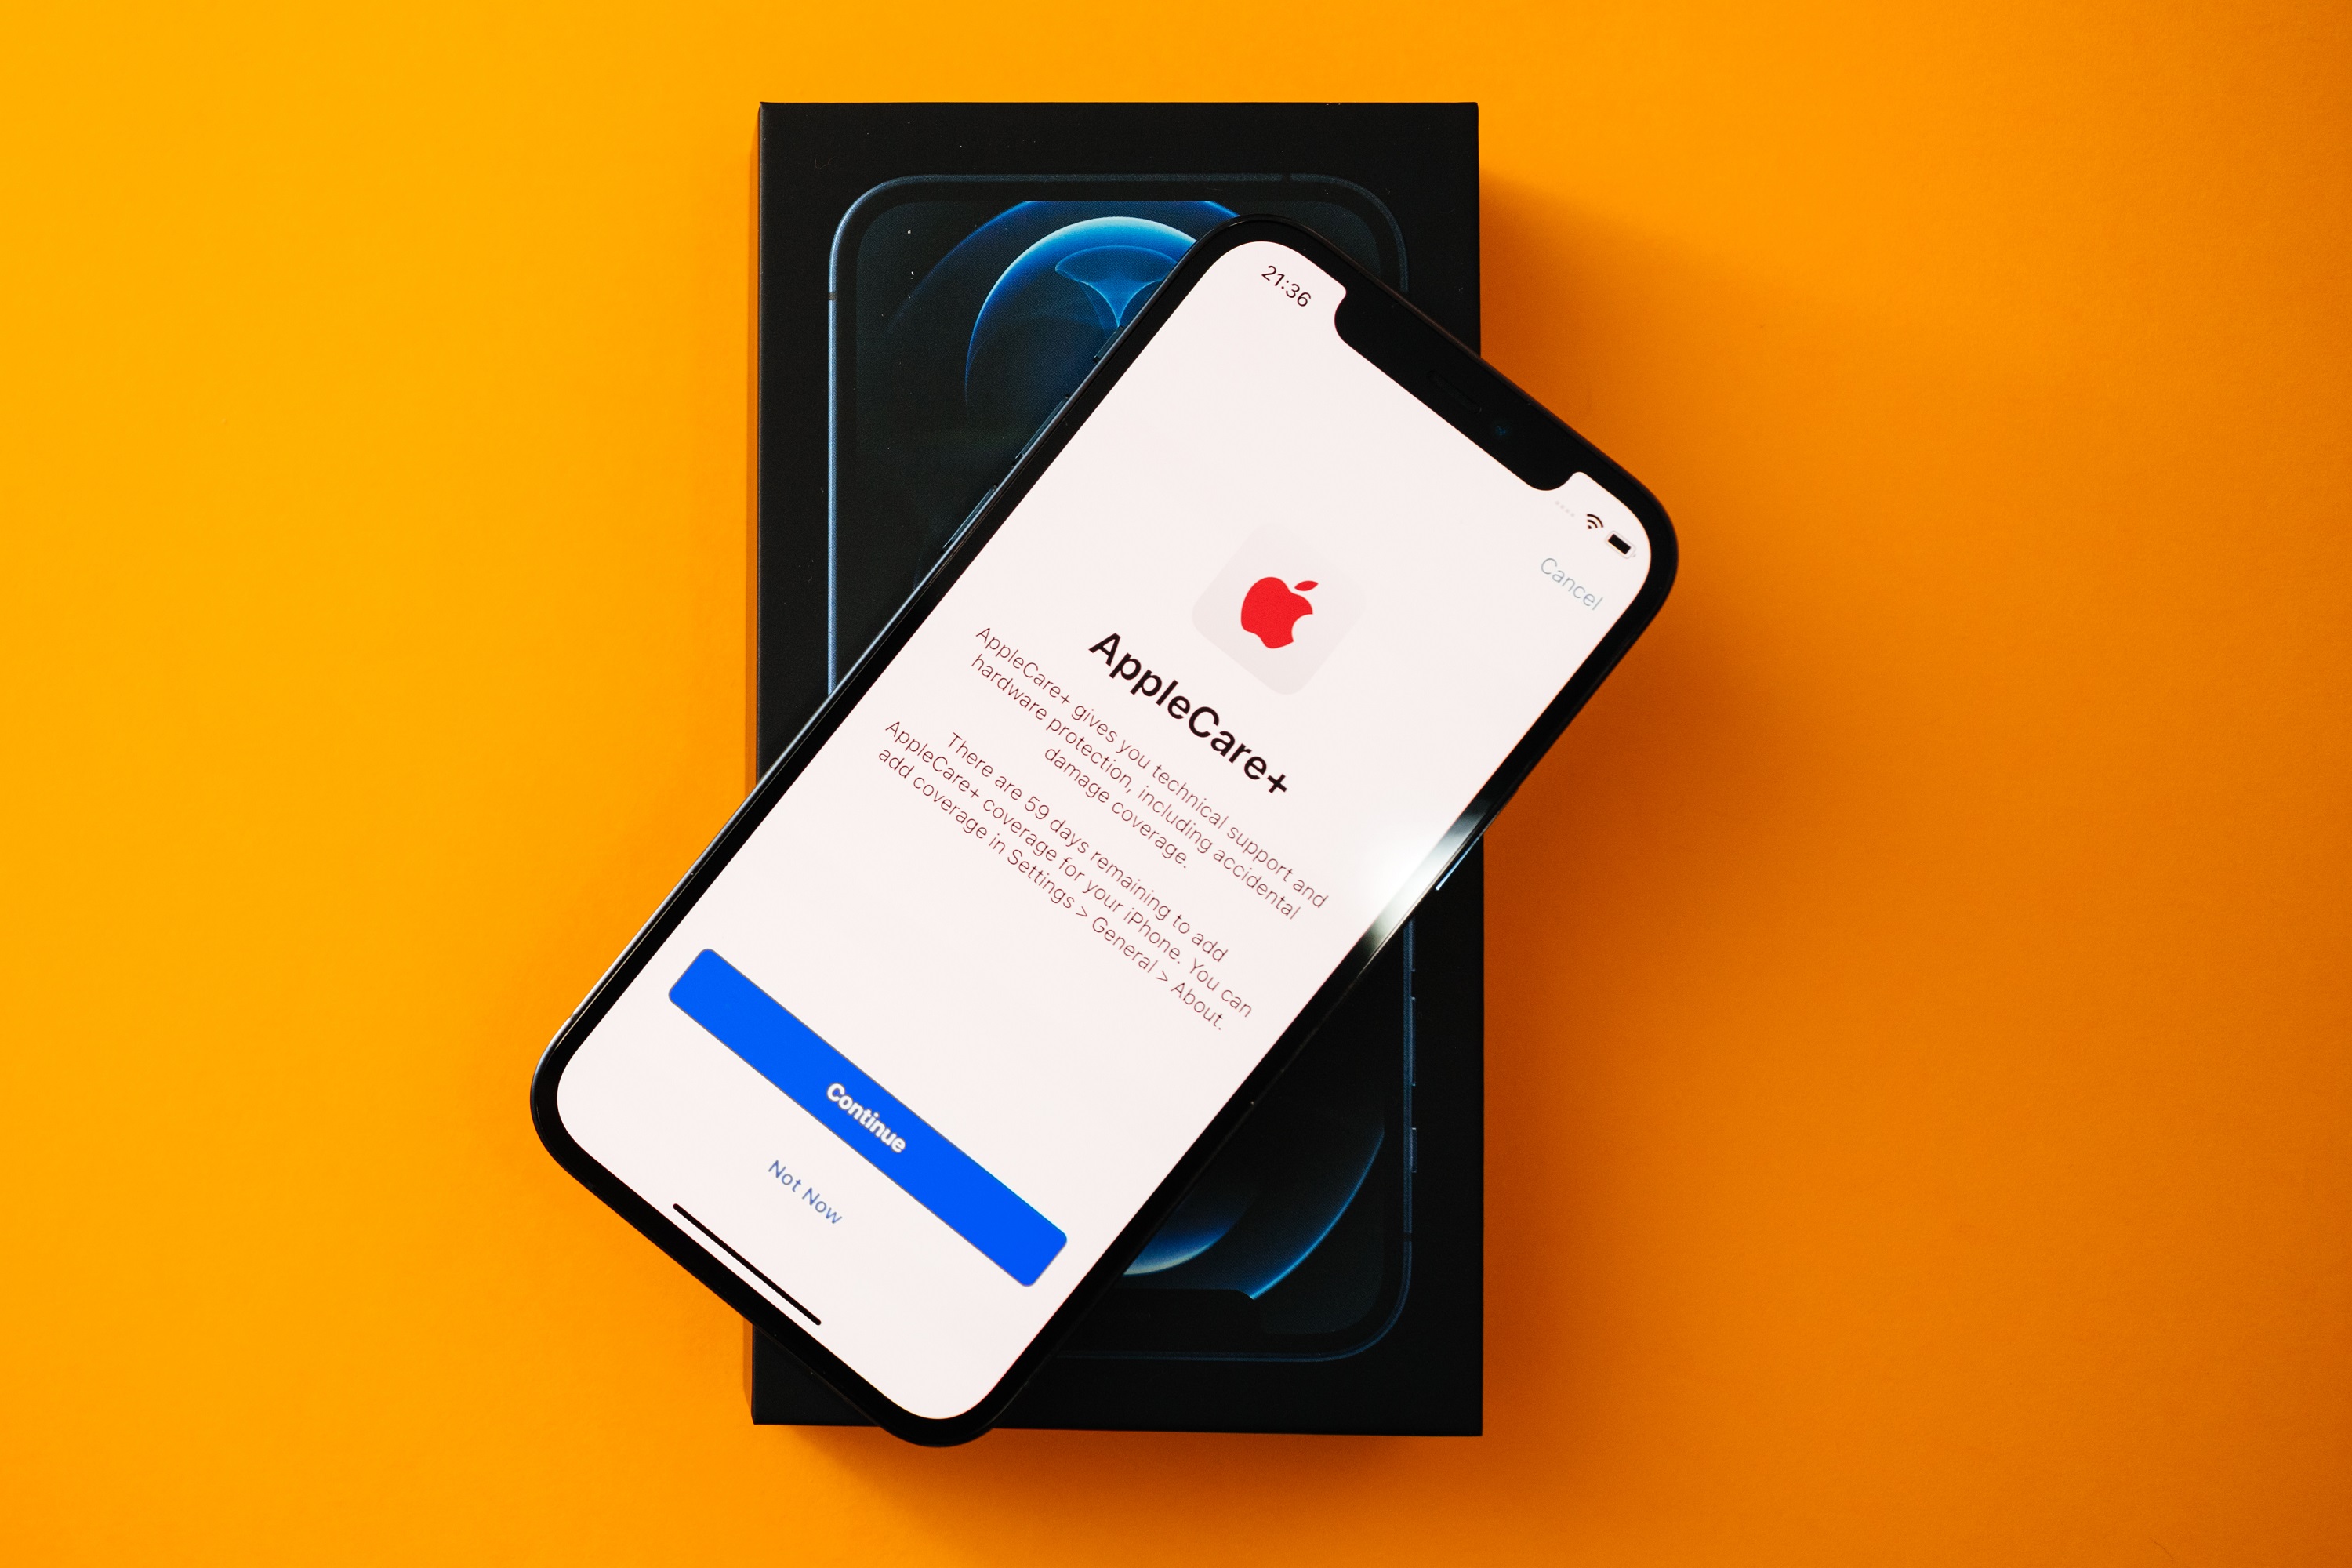 applecare for mac phone number